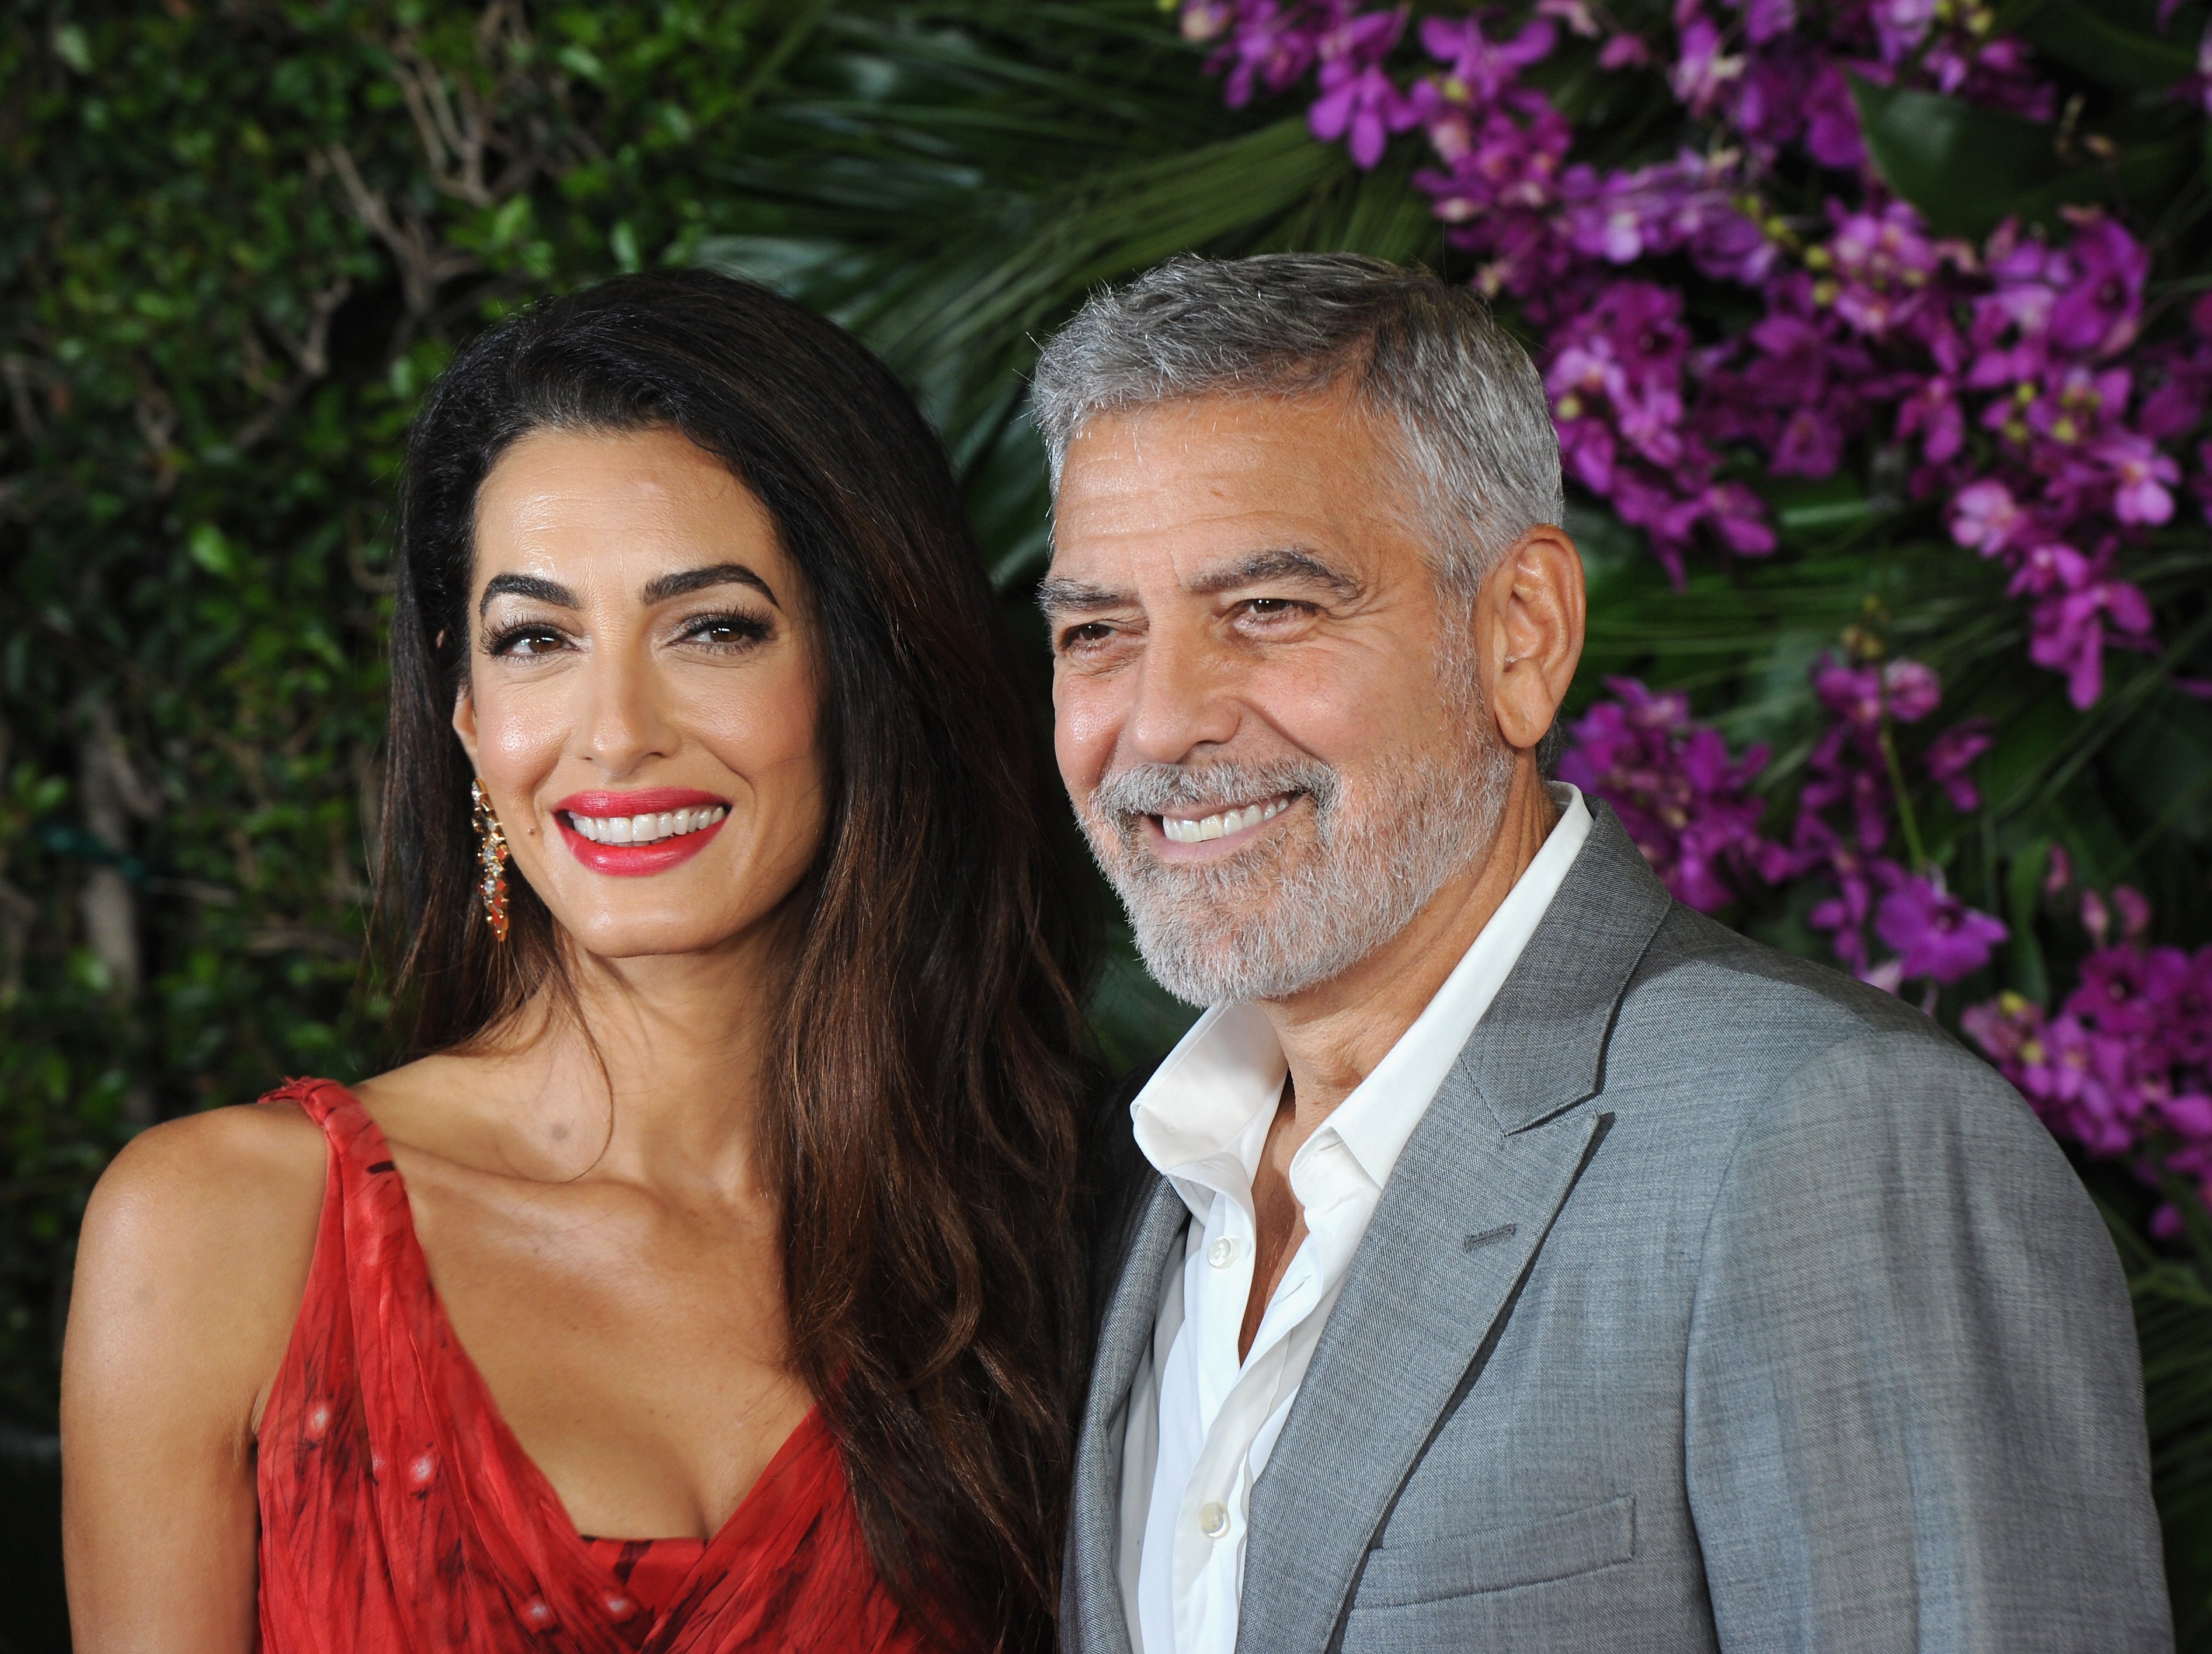 George Clooney and his wife Amal Clooney attend the premiere of Universal Pictures' "Ticket To Paradise" held at Regency Village Theatre on October 17, 2022 in Los Angeles, California | Source: Getty Images